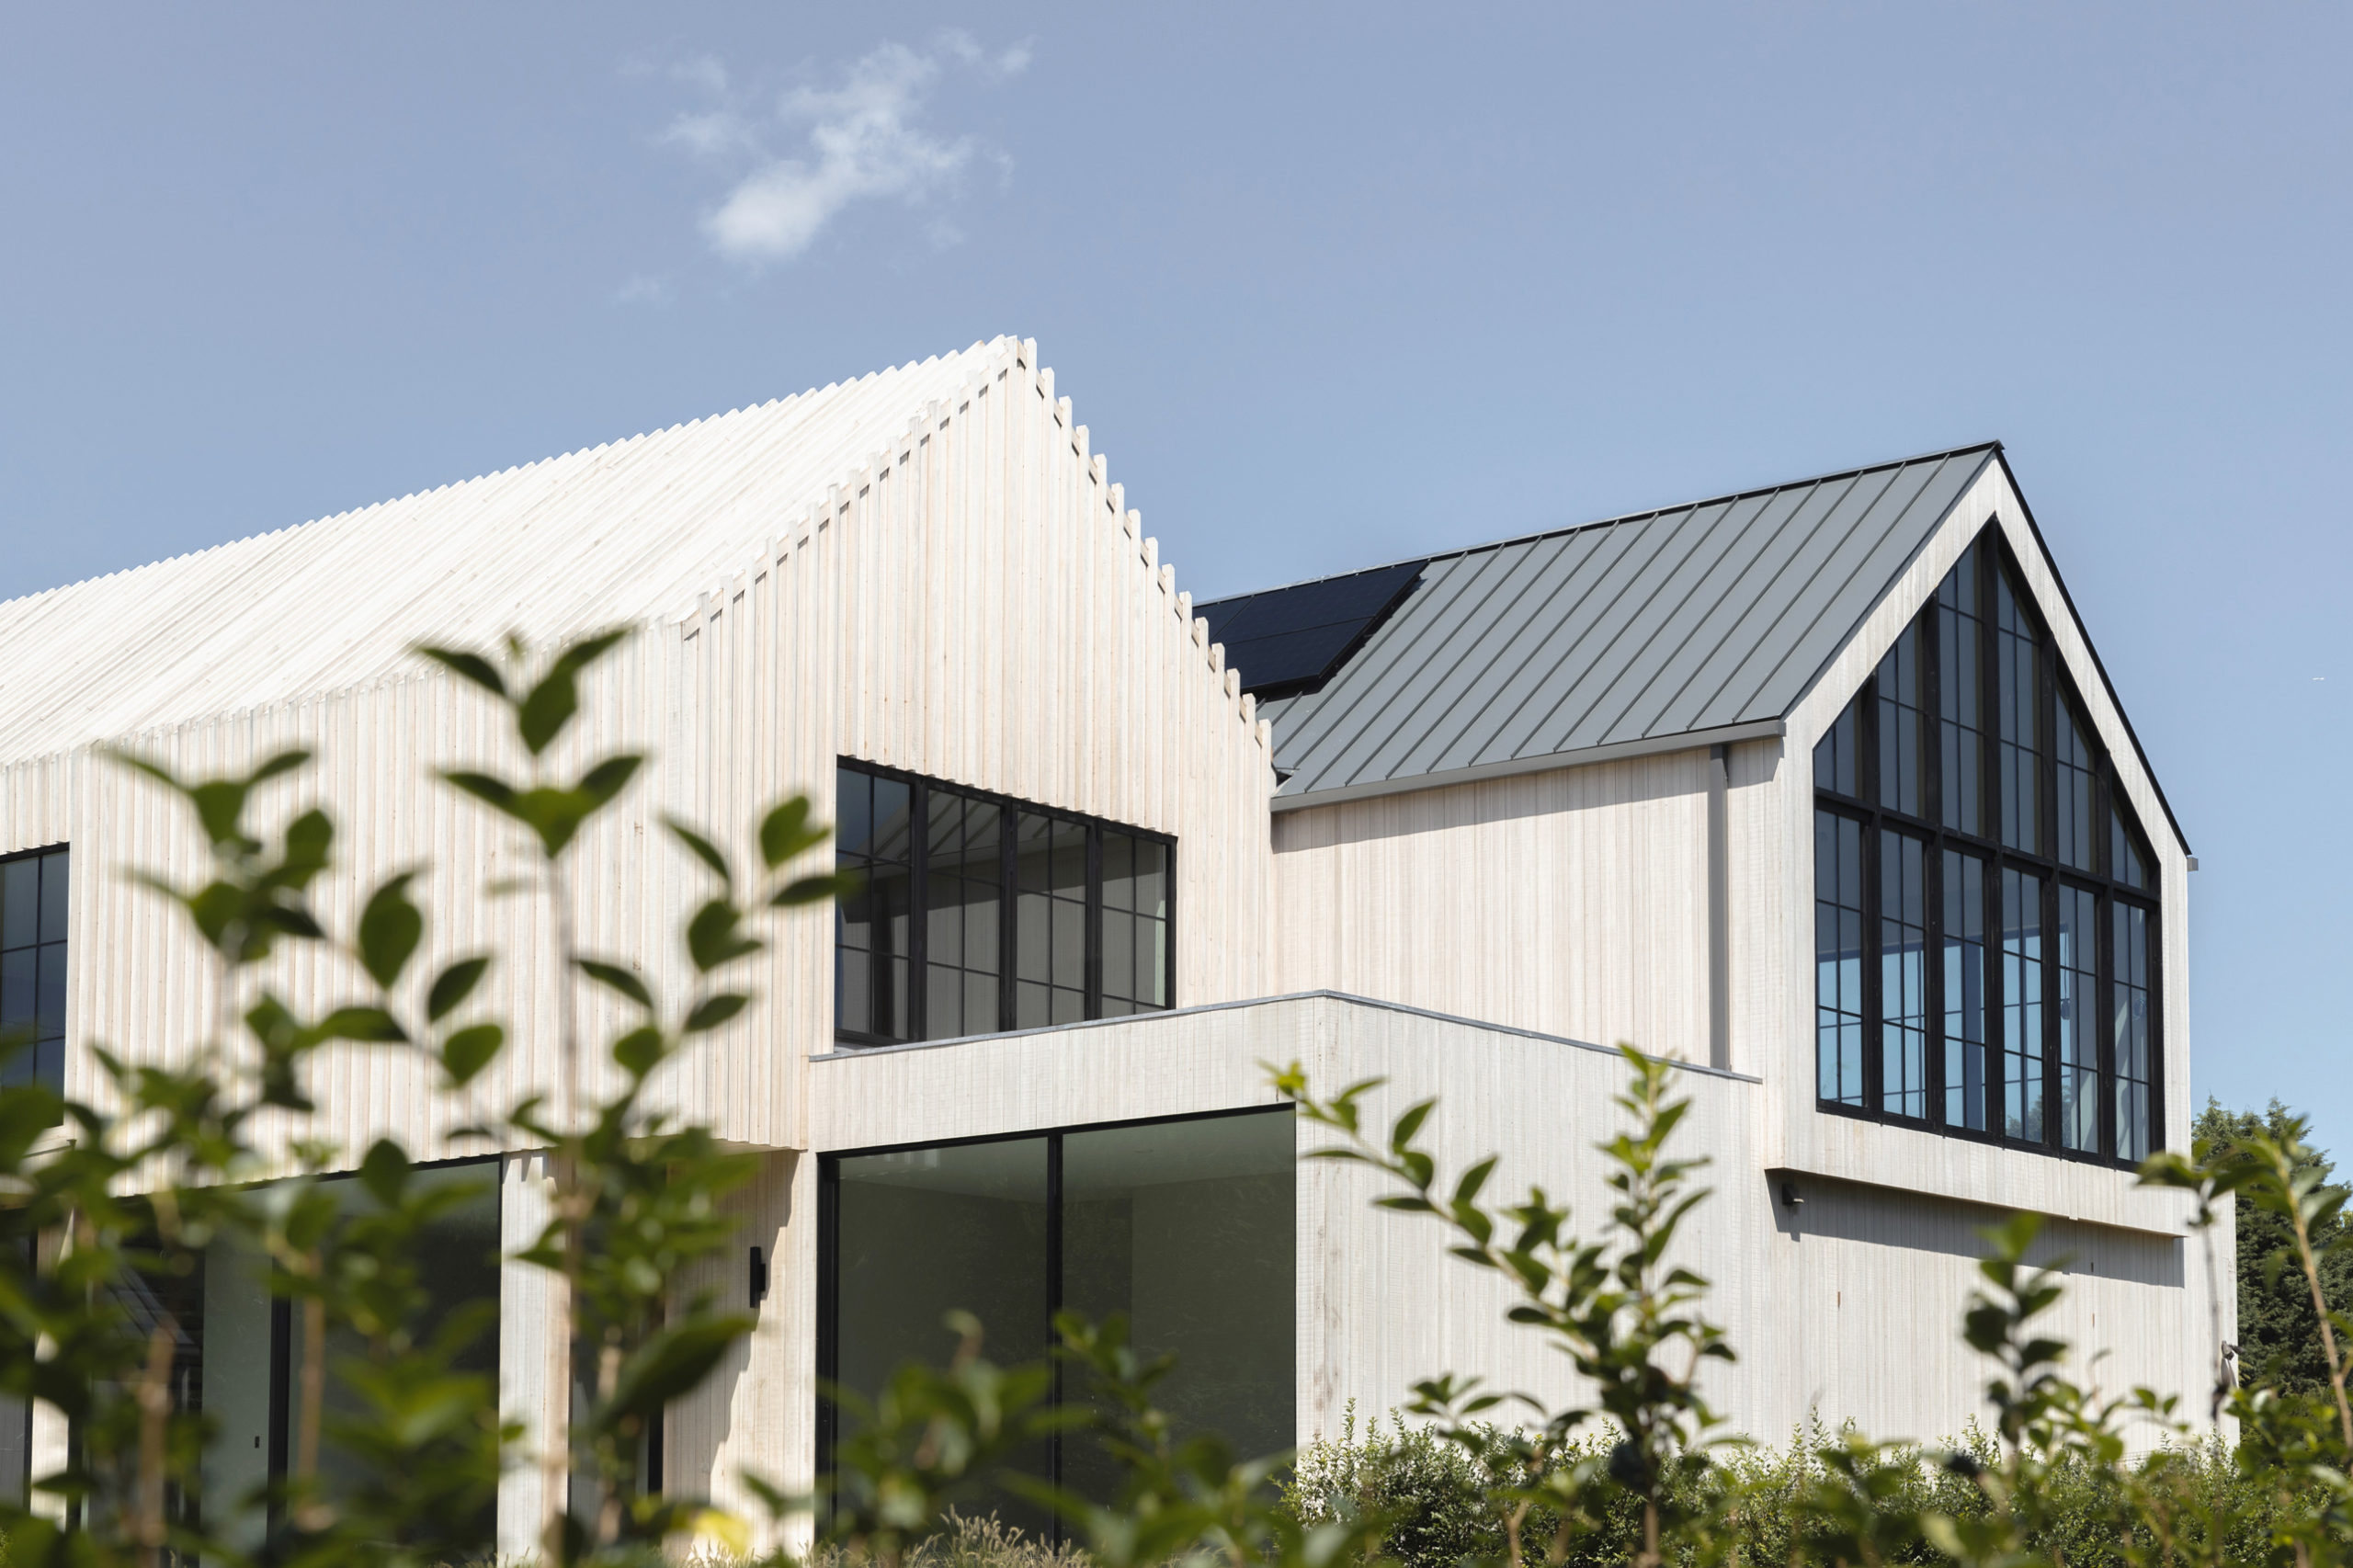 Twin Gables ft. reSAWN TIMBER co. SiOO:X Abodo Vulcan Cladding, Roofing, Trellis, and Slats